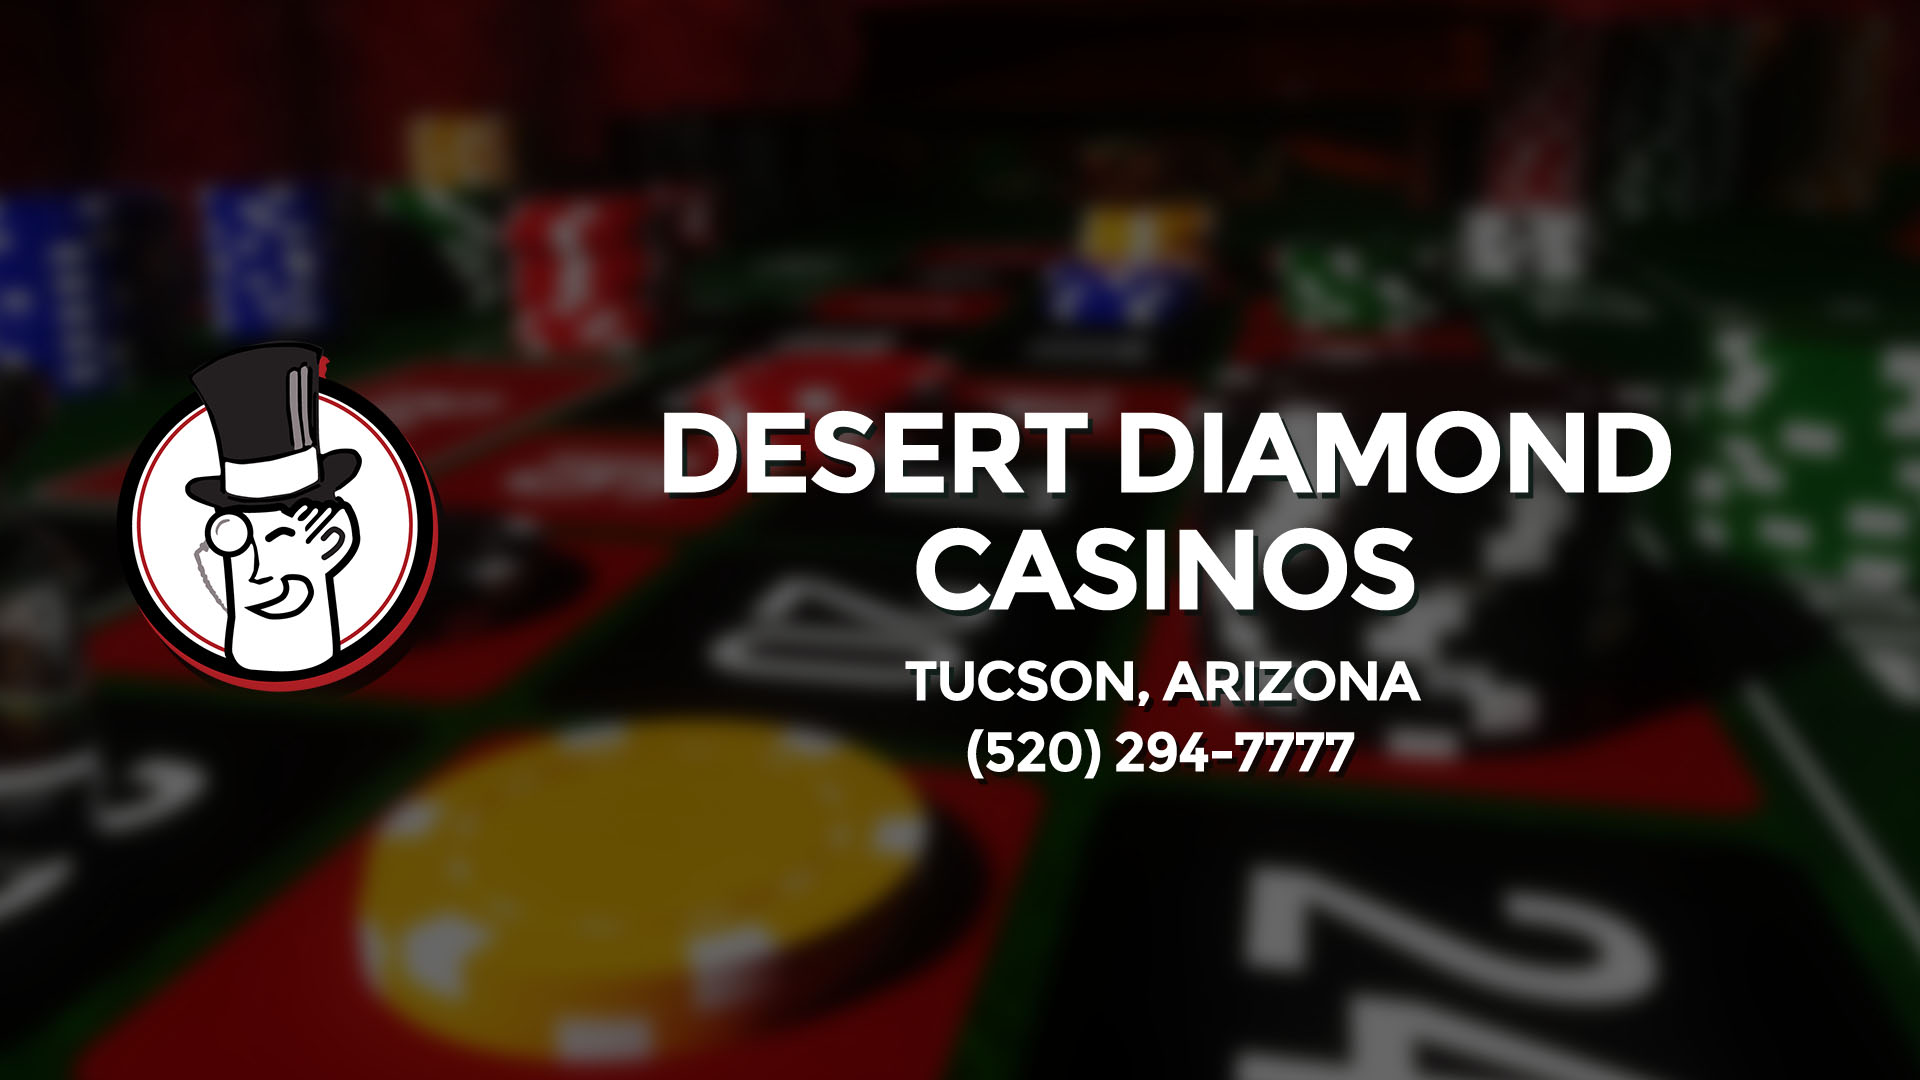 Does Desert Diamond Casino Have Table Games